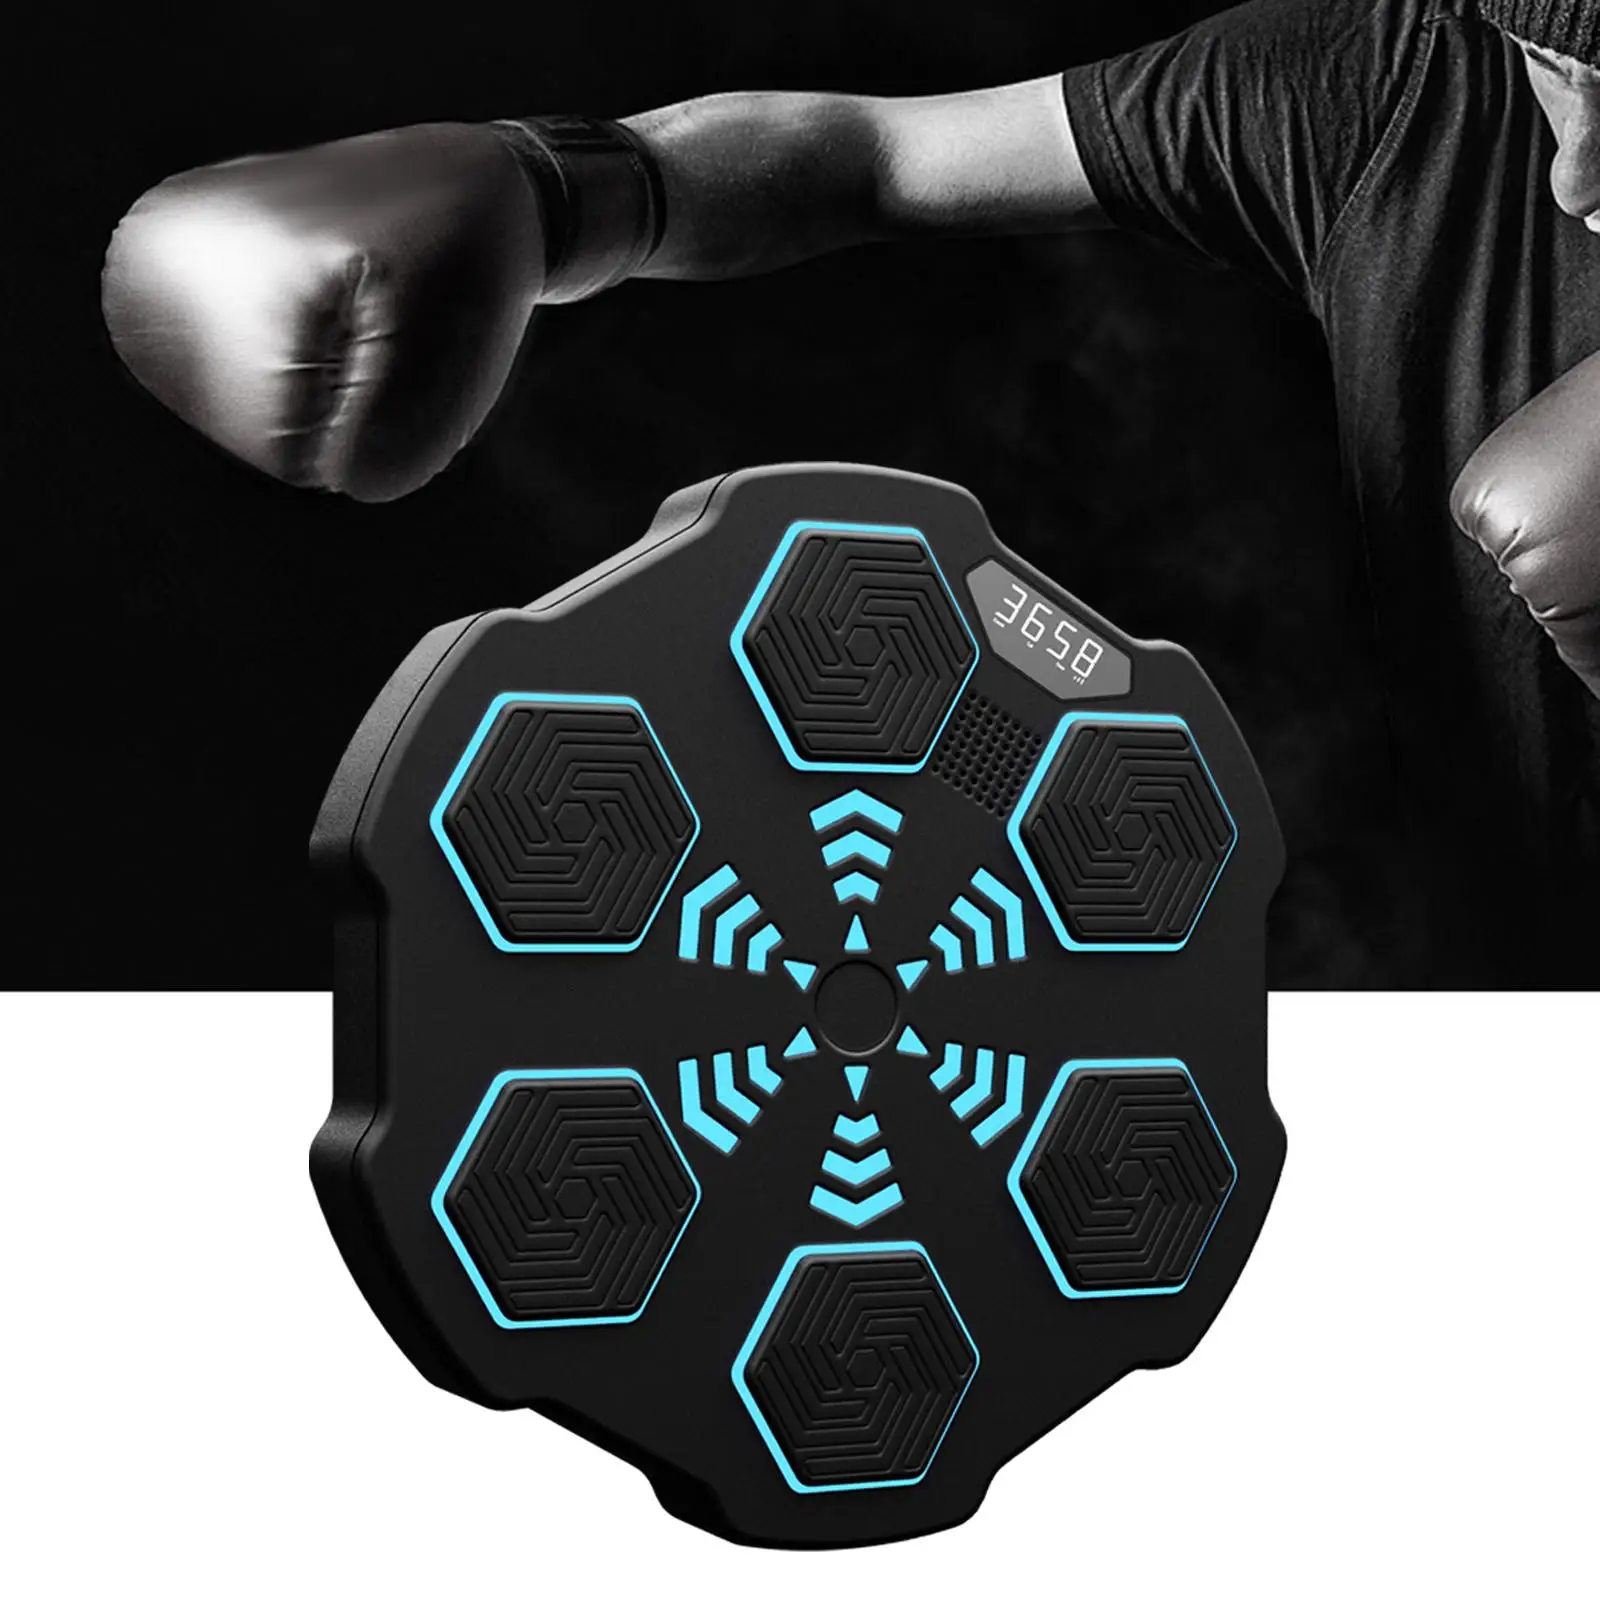 Smart Electronic Wall Target Wall Mounted Music Boxing Machine for Trainer Kids Adults Strength Training Household Practice